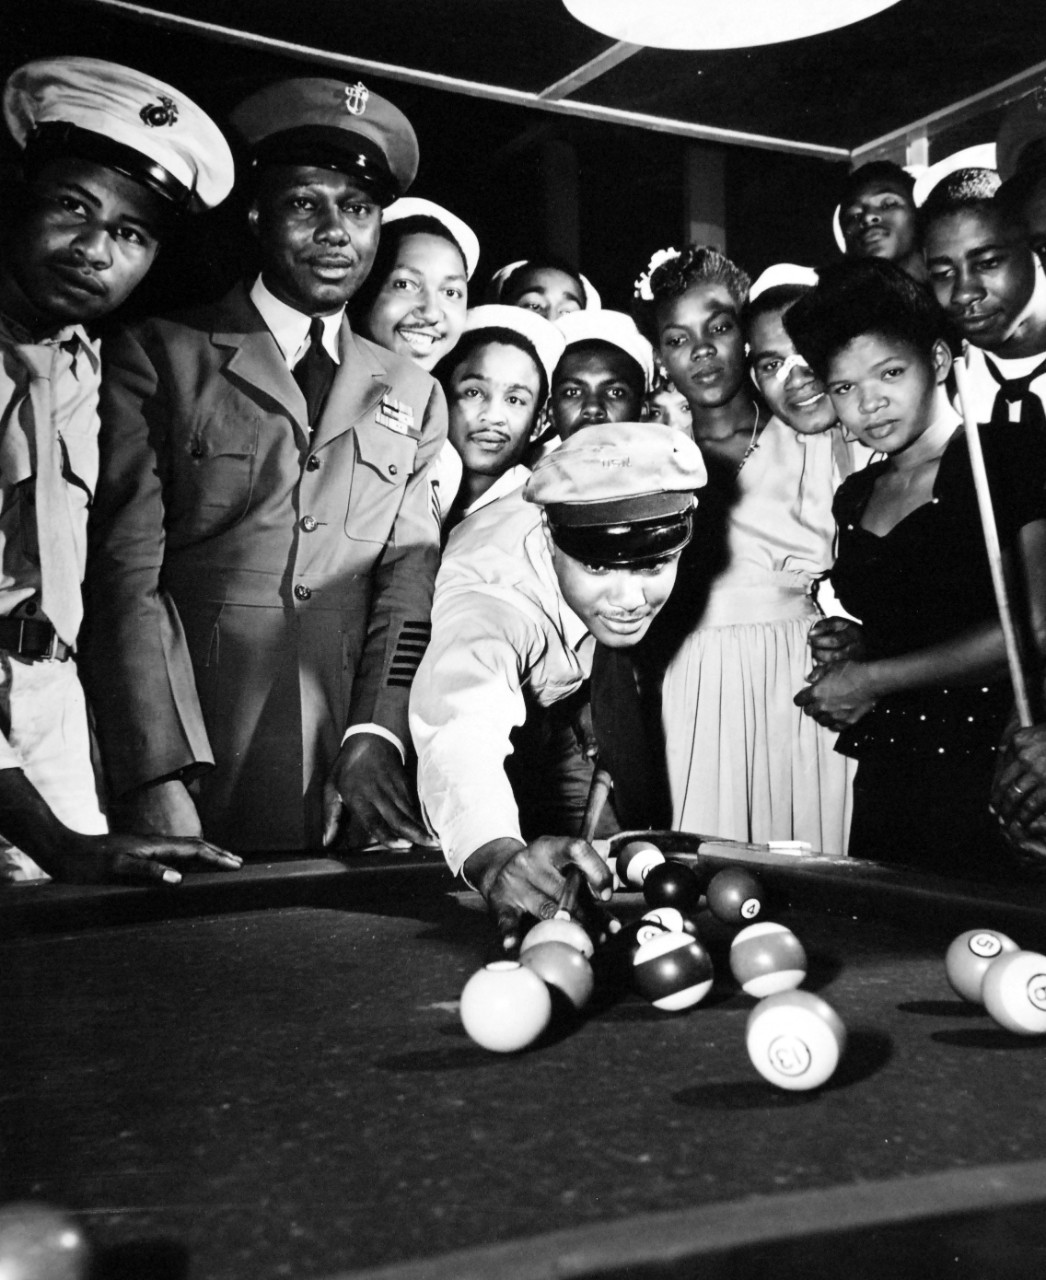 80-G-702692:  USO, Port of Spain, Trinidad, May 1946.  An 8th Fleet Steward’s Mate takes his cue at game of pool at the USO in Port of Spain, Trinidad, May 24, 1946. Official U.S. Navy Photograph, now in the collections of the National Archives.  